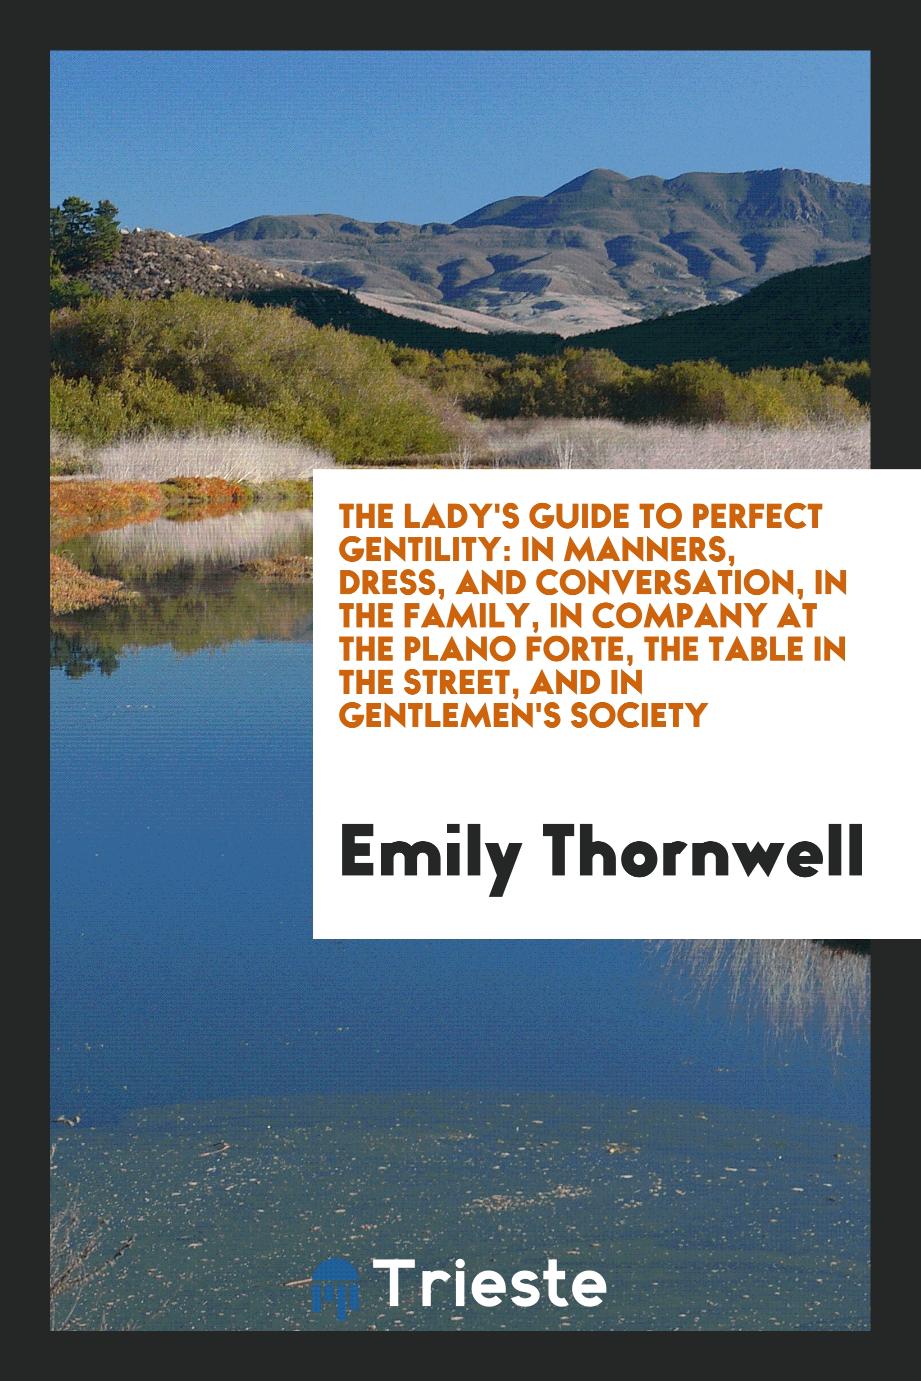 The Lady's Guide to Perfect Gentility: In Manners, Dress, and Conversation, in the Family, in Company at the Plano Forte, the Table in the Street, and in Gentlemen's Society